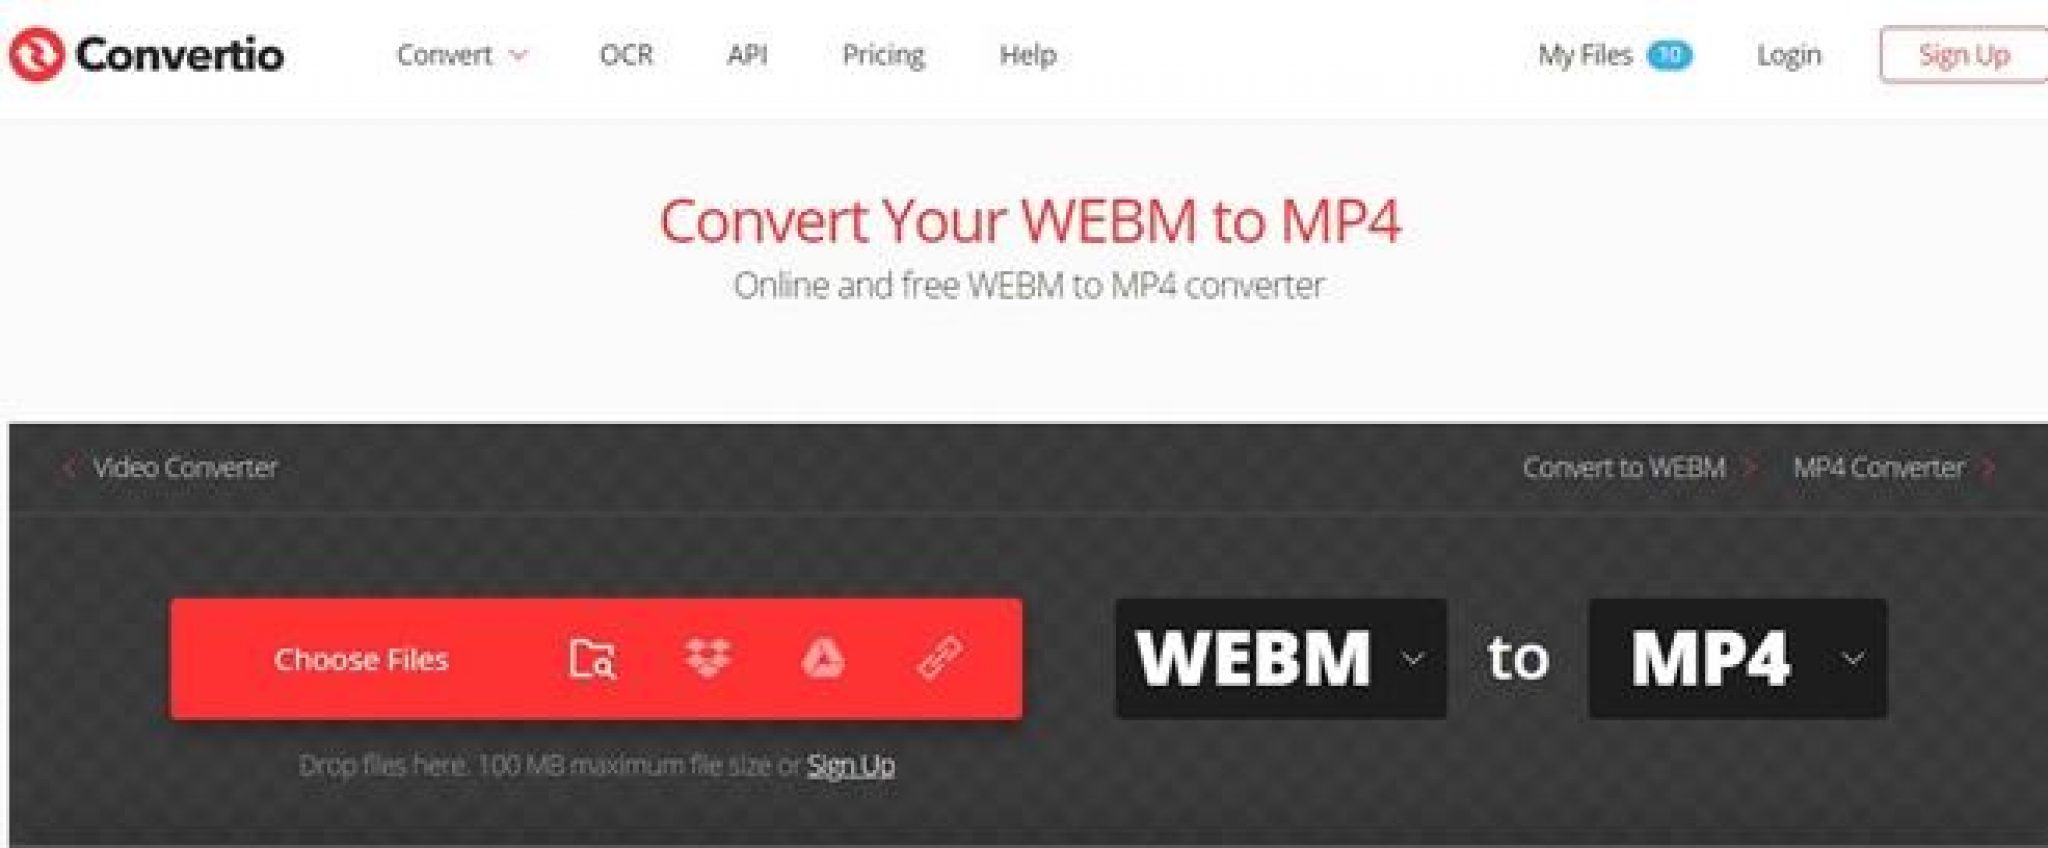 online video converter to mp4 from url